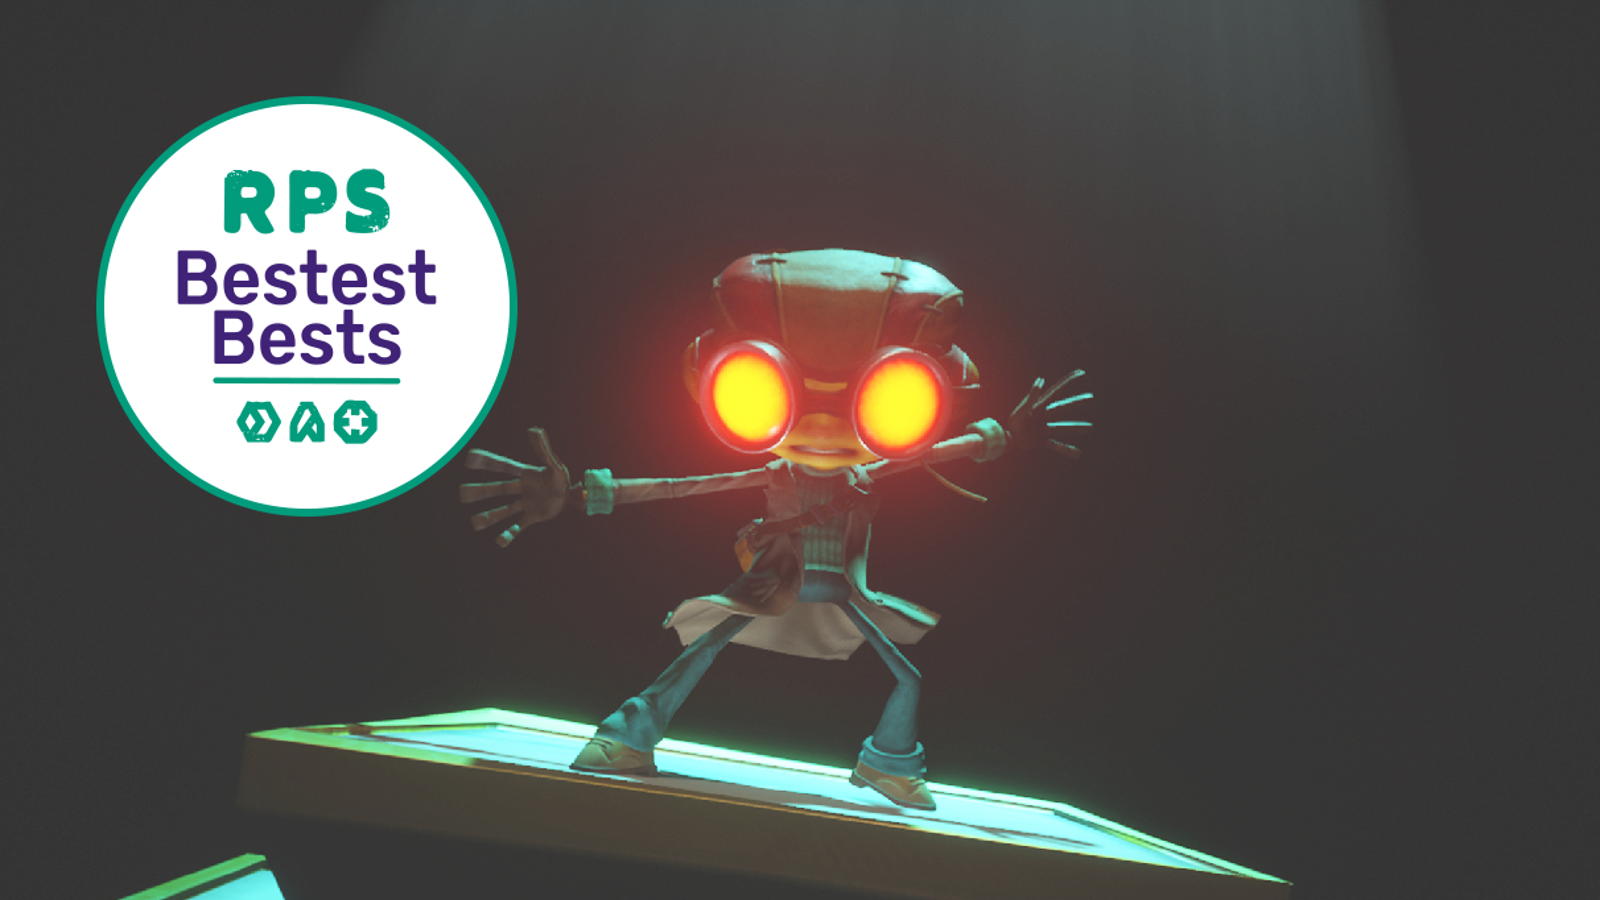 Psychonauts 2 review round-up: Verdict and Metacritic rating ahead